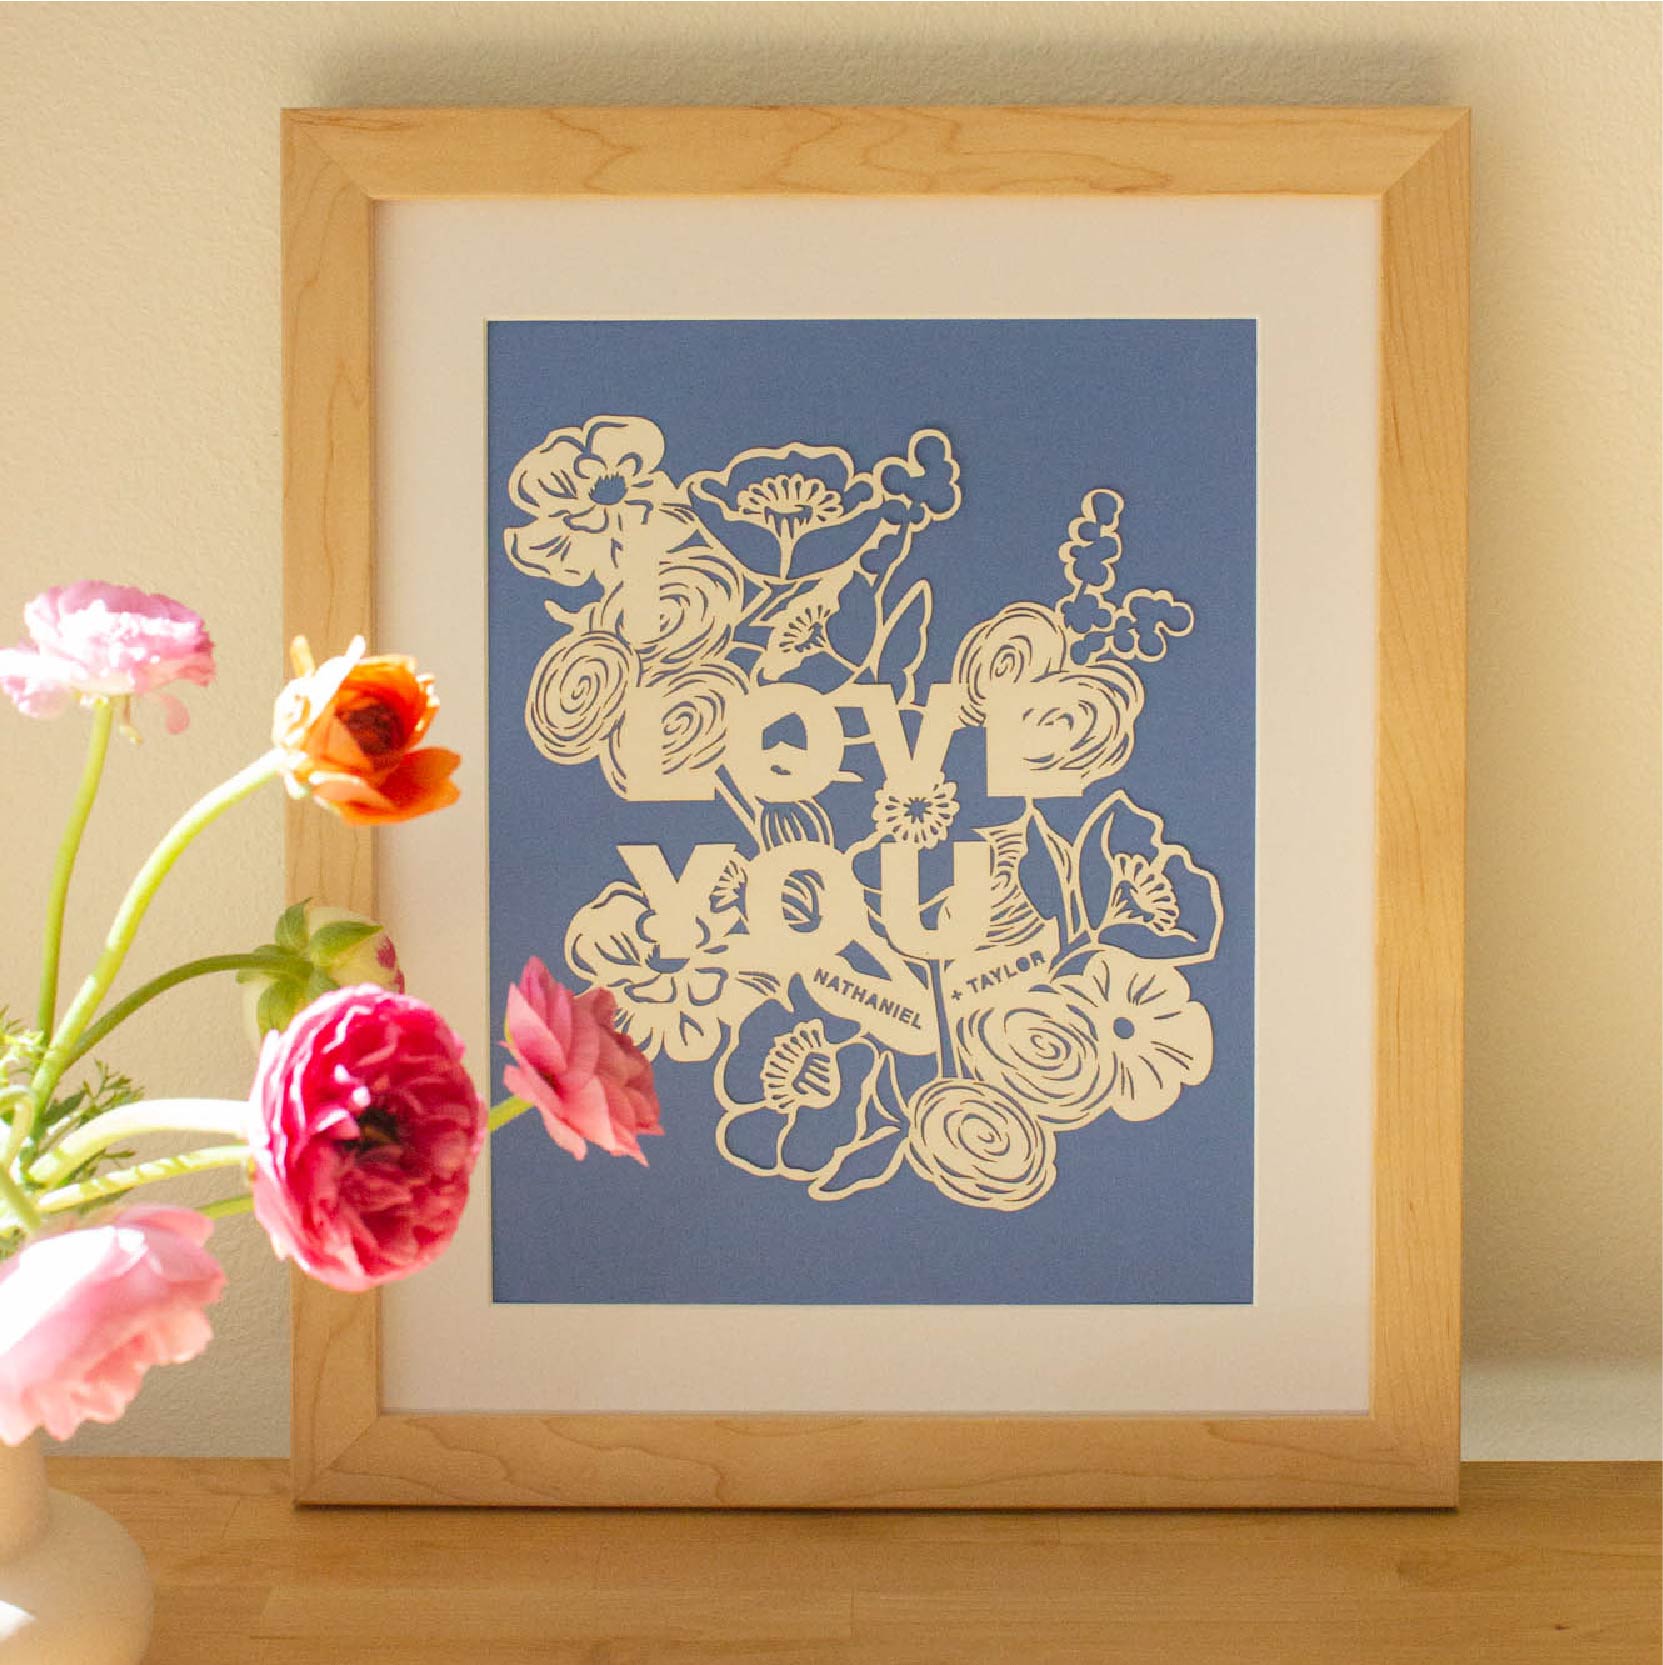 I Love You Flowers Personalized Paper Cut Art Print